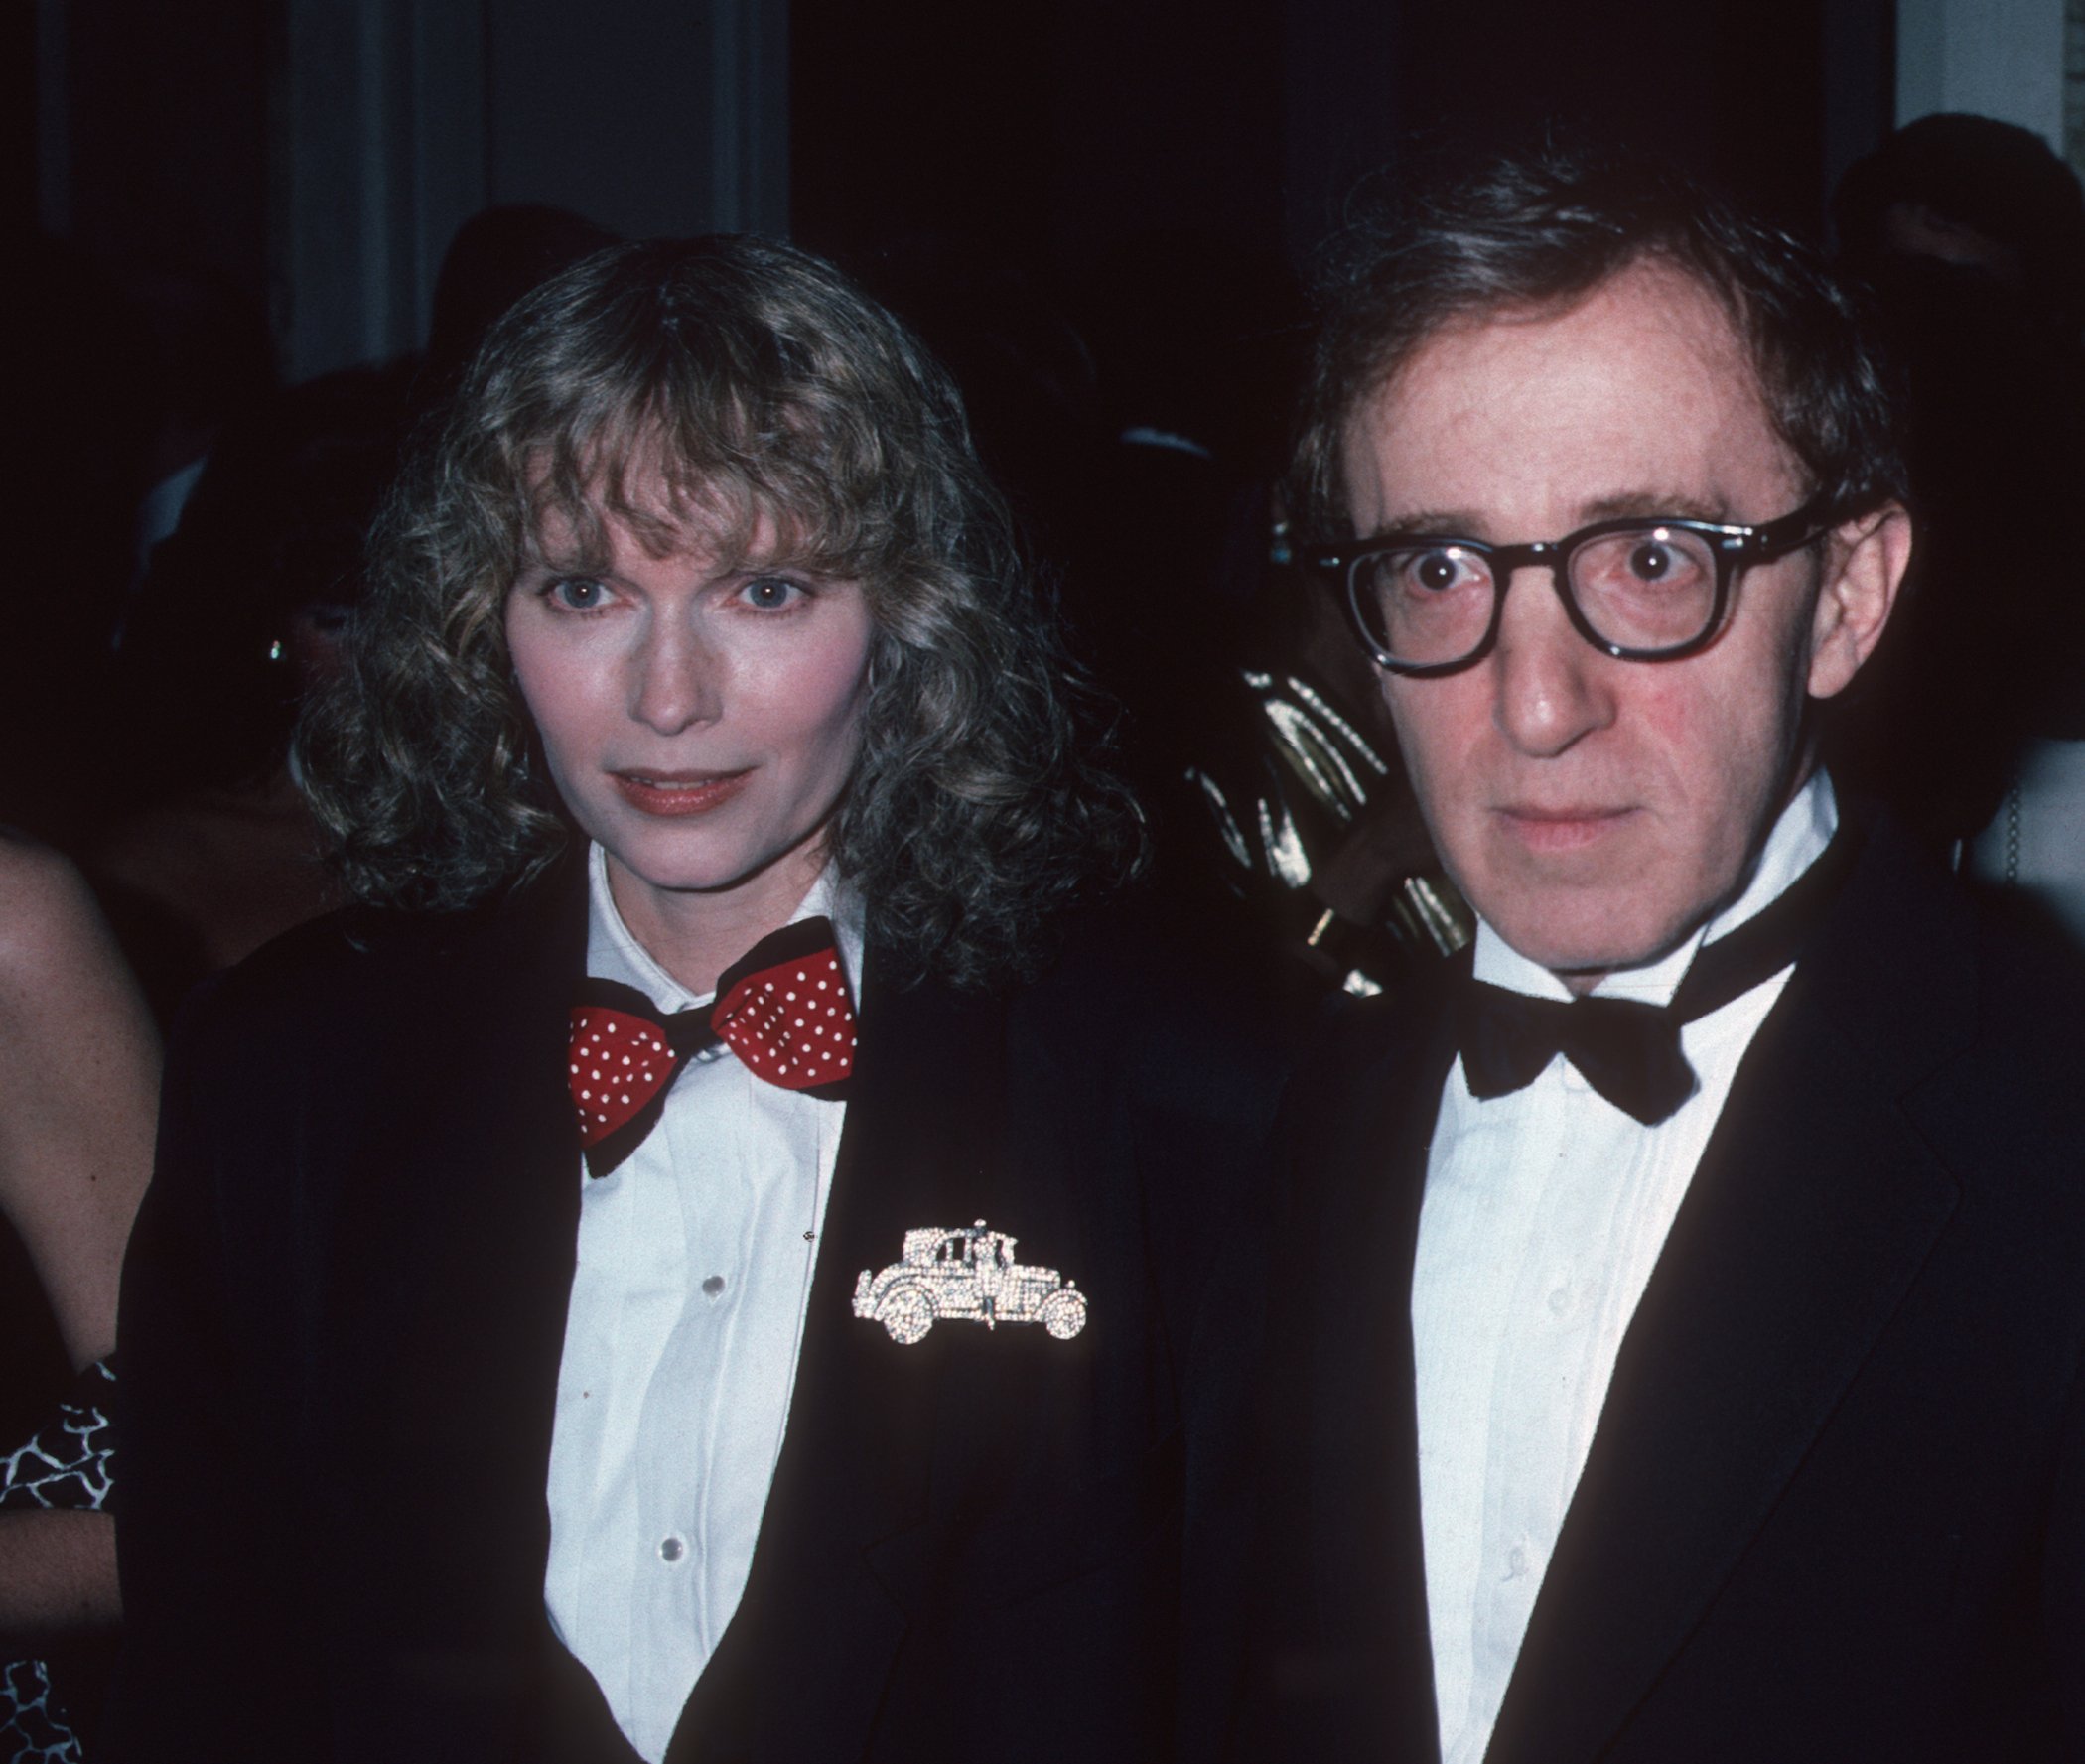 Woody Allen and Mia Farrow walking together in 1986